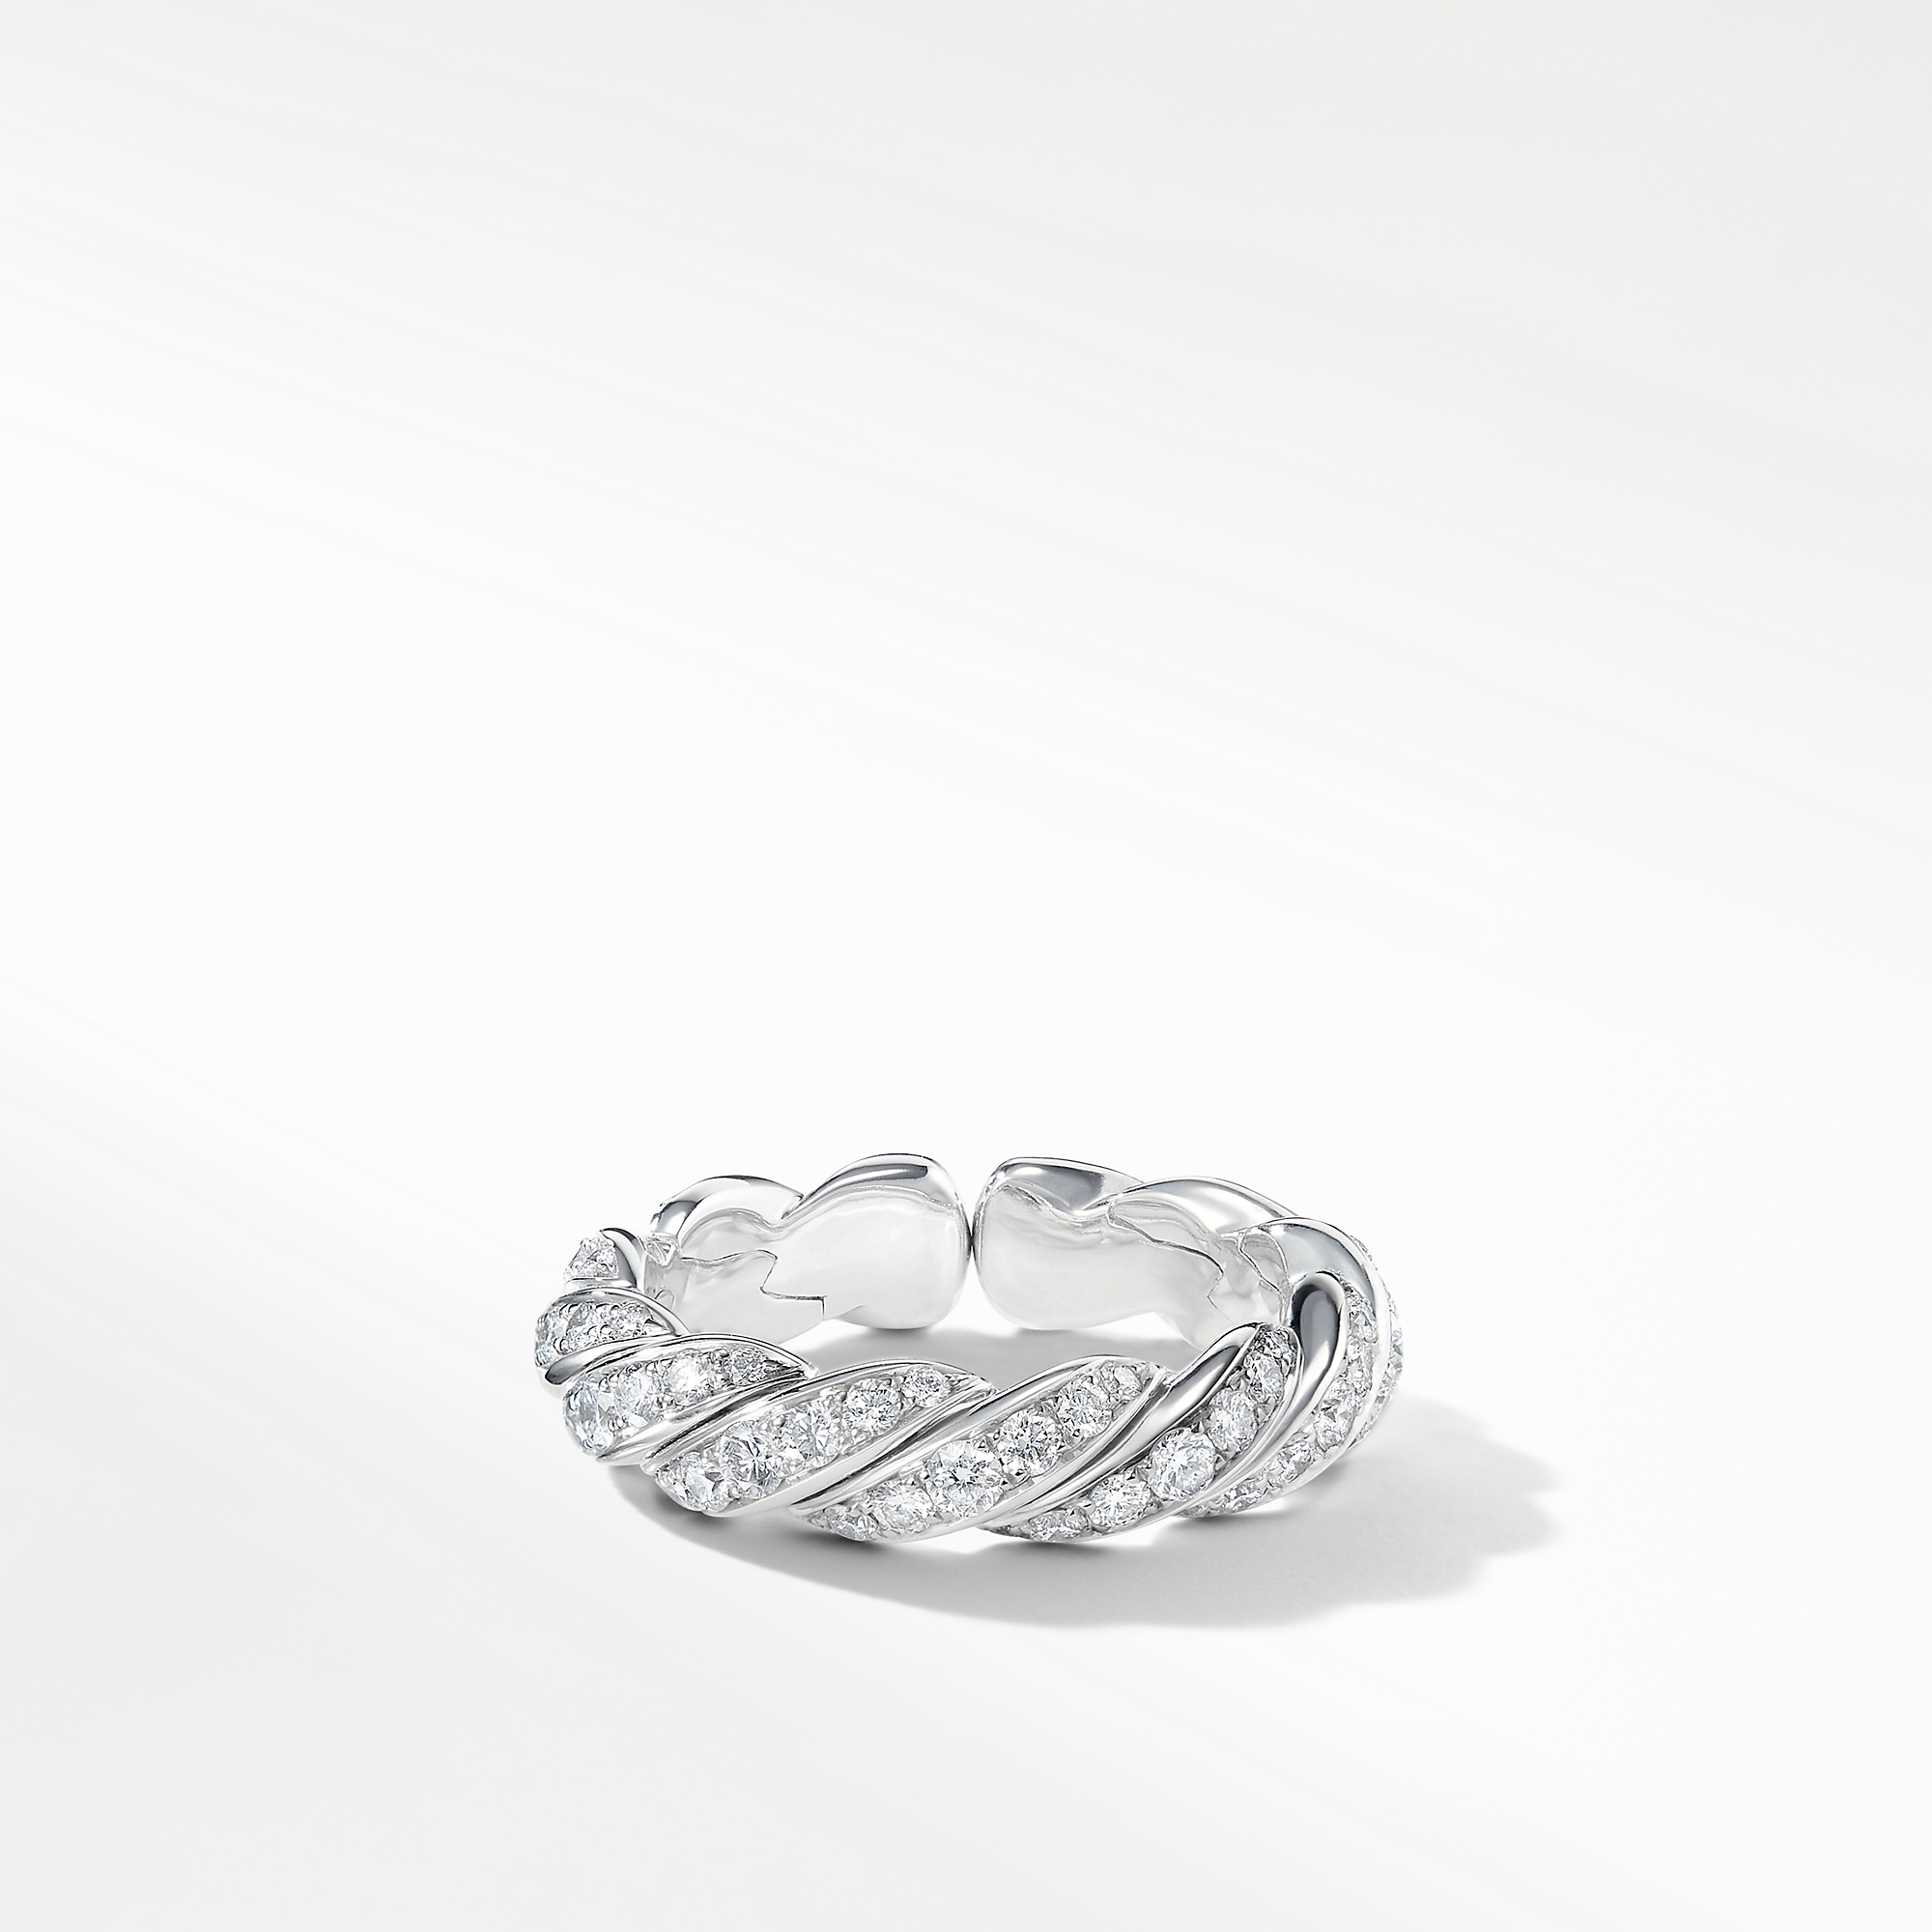 Pavéflex Band Ring in 18K White Gold with Diamonds, 5mm